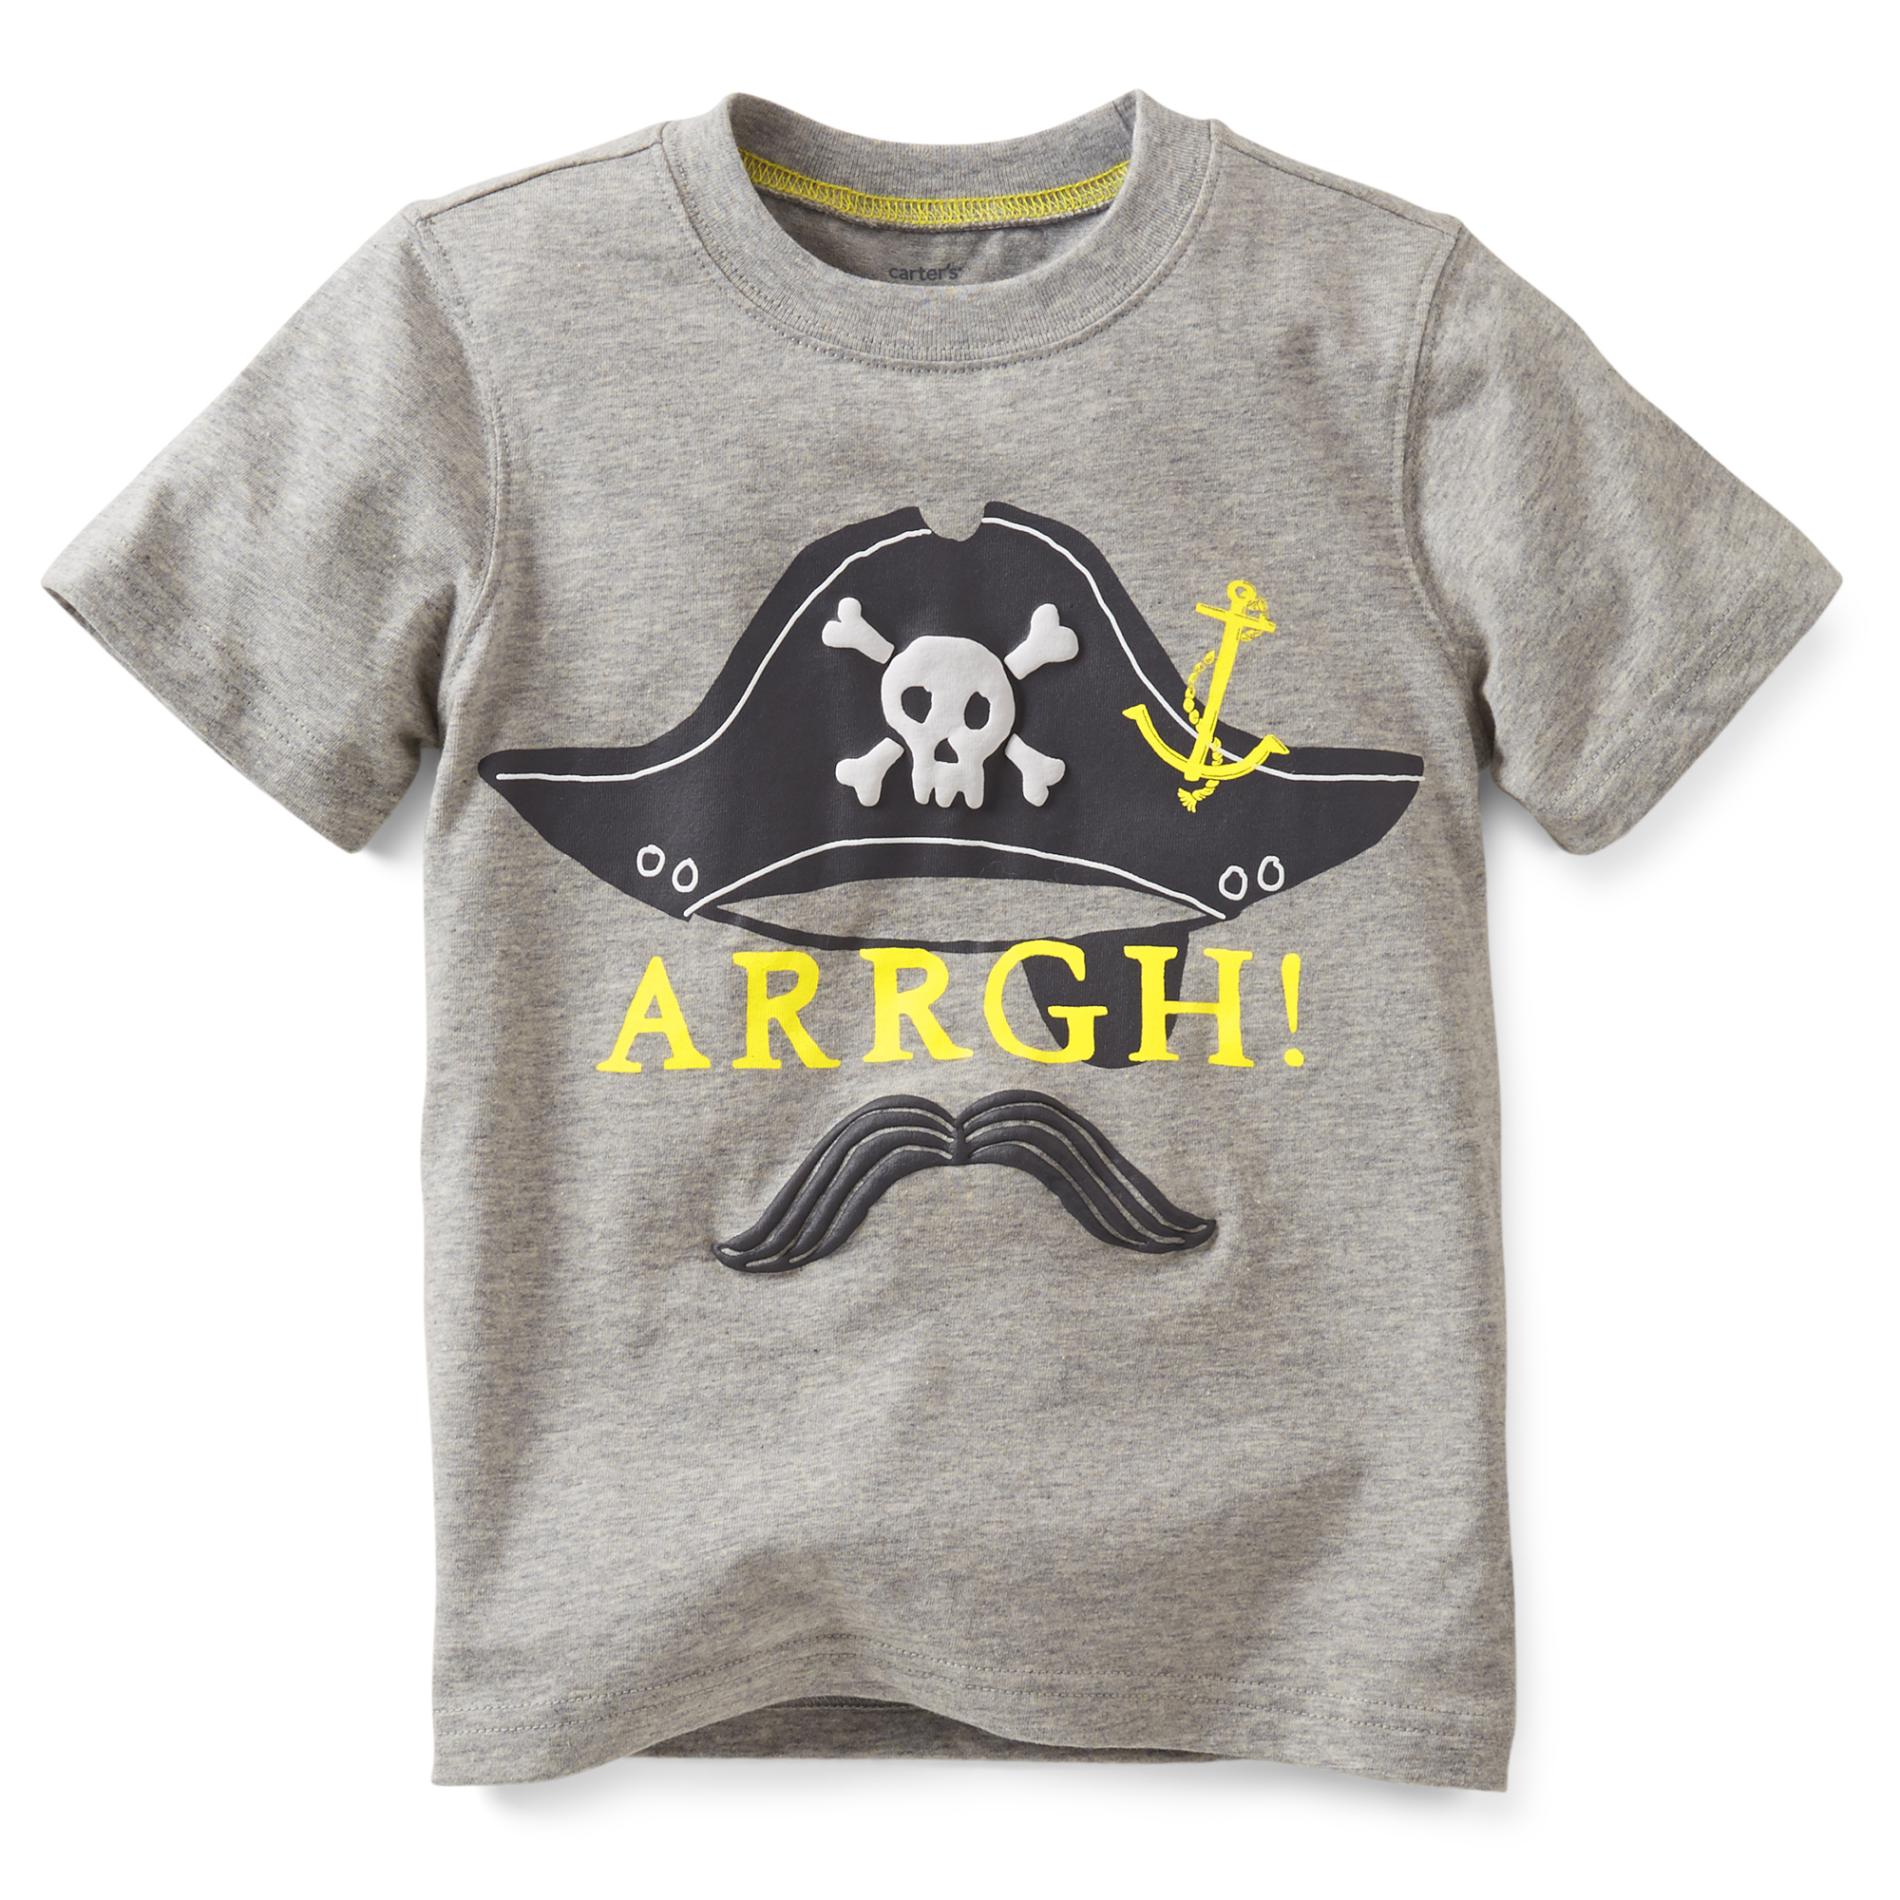 Carter's Toddler Boy's Graphic T-Shirt - Pirate